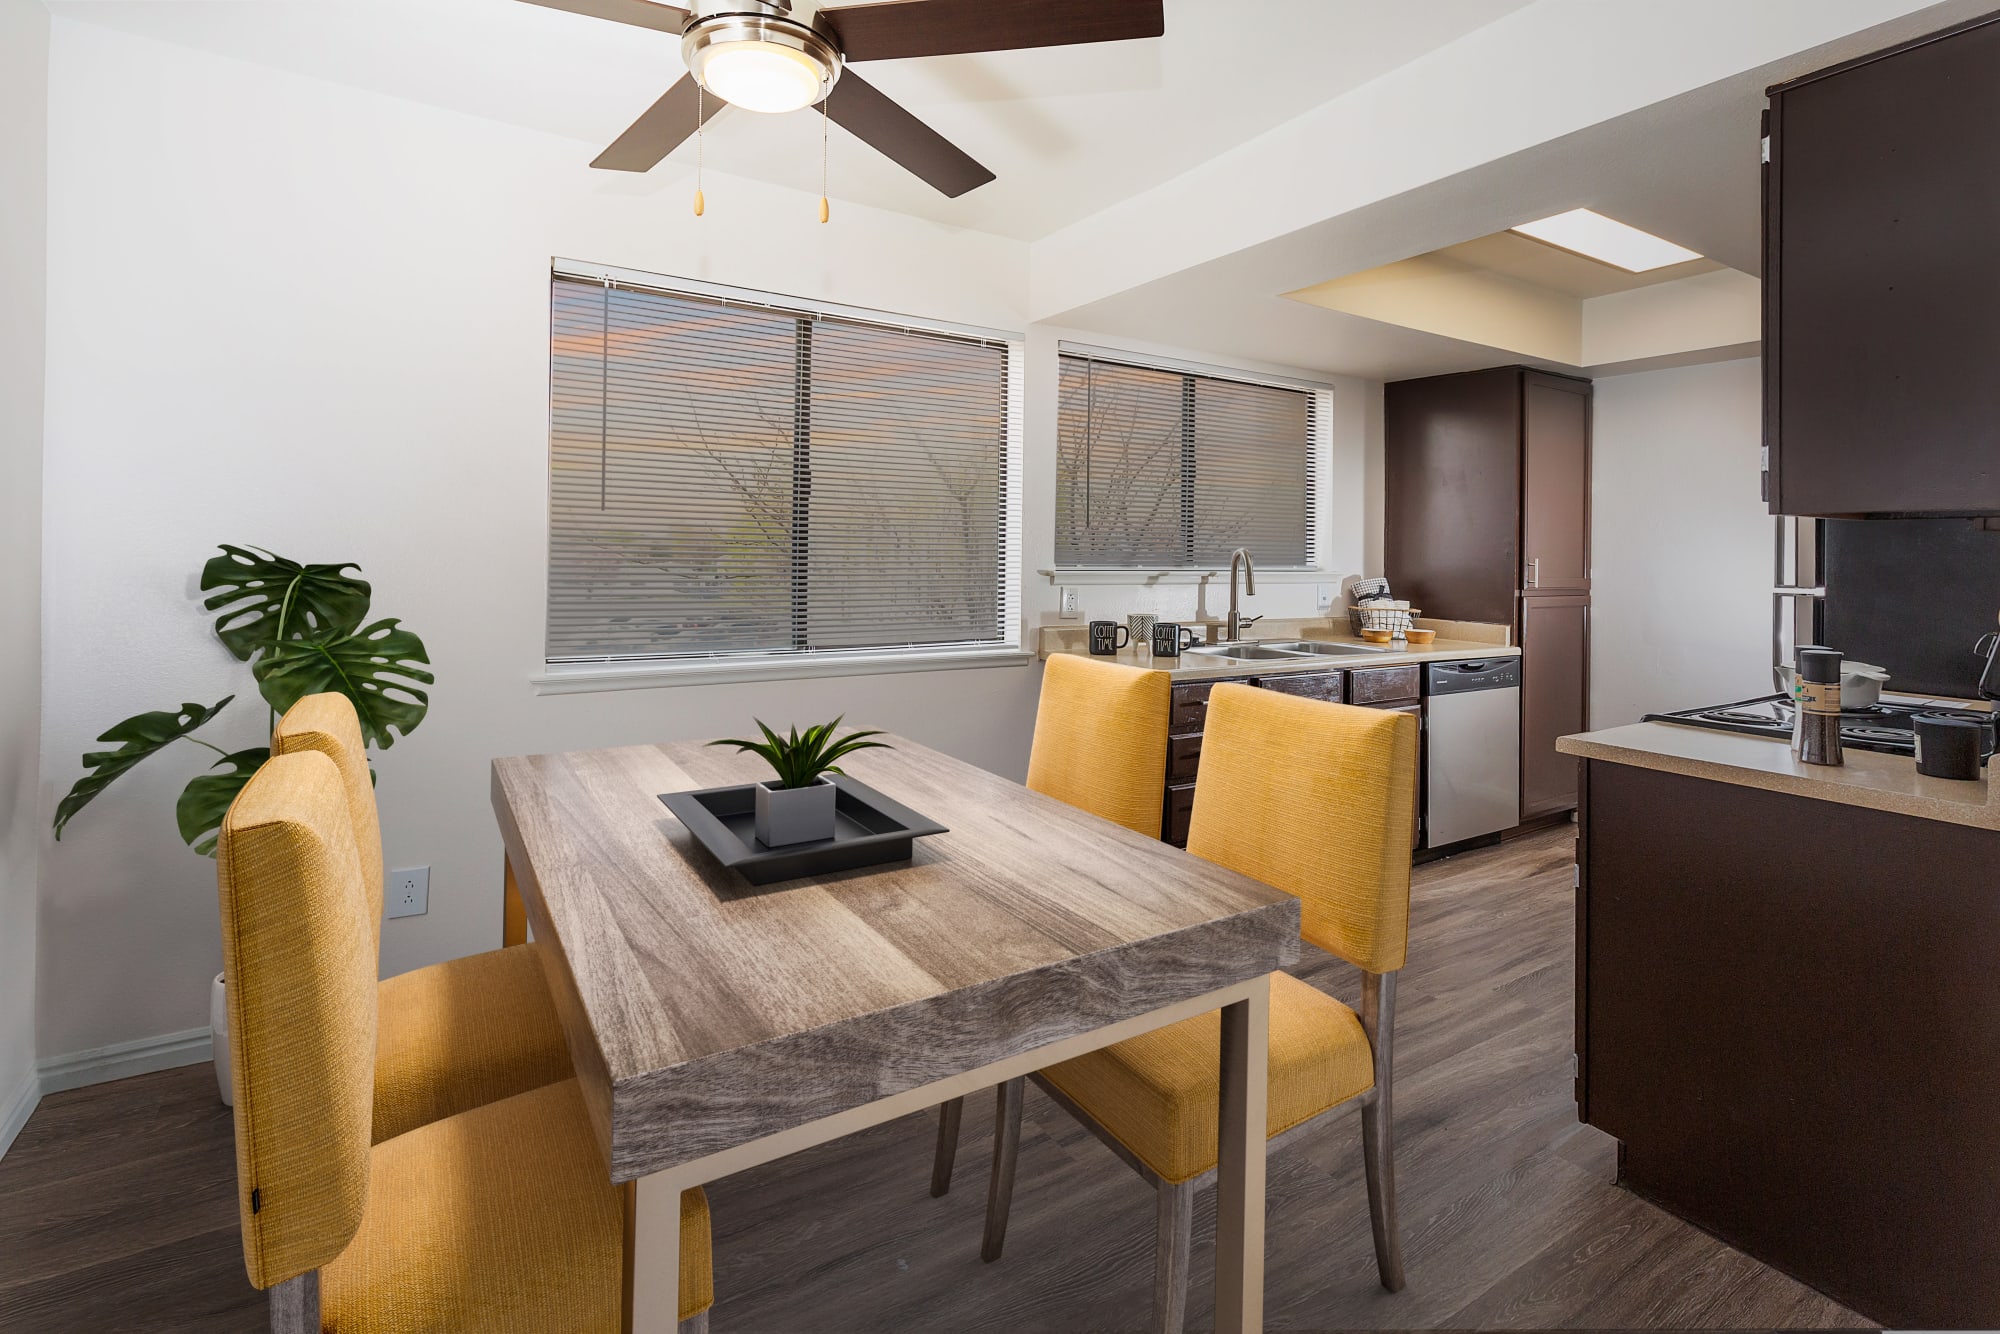 Spacious kitchen with a view into the living room at Shadowbrook Apartments in West Valley City, Utah